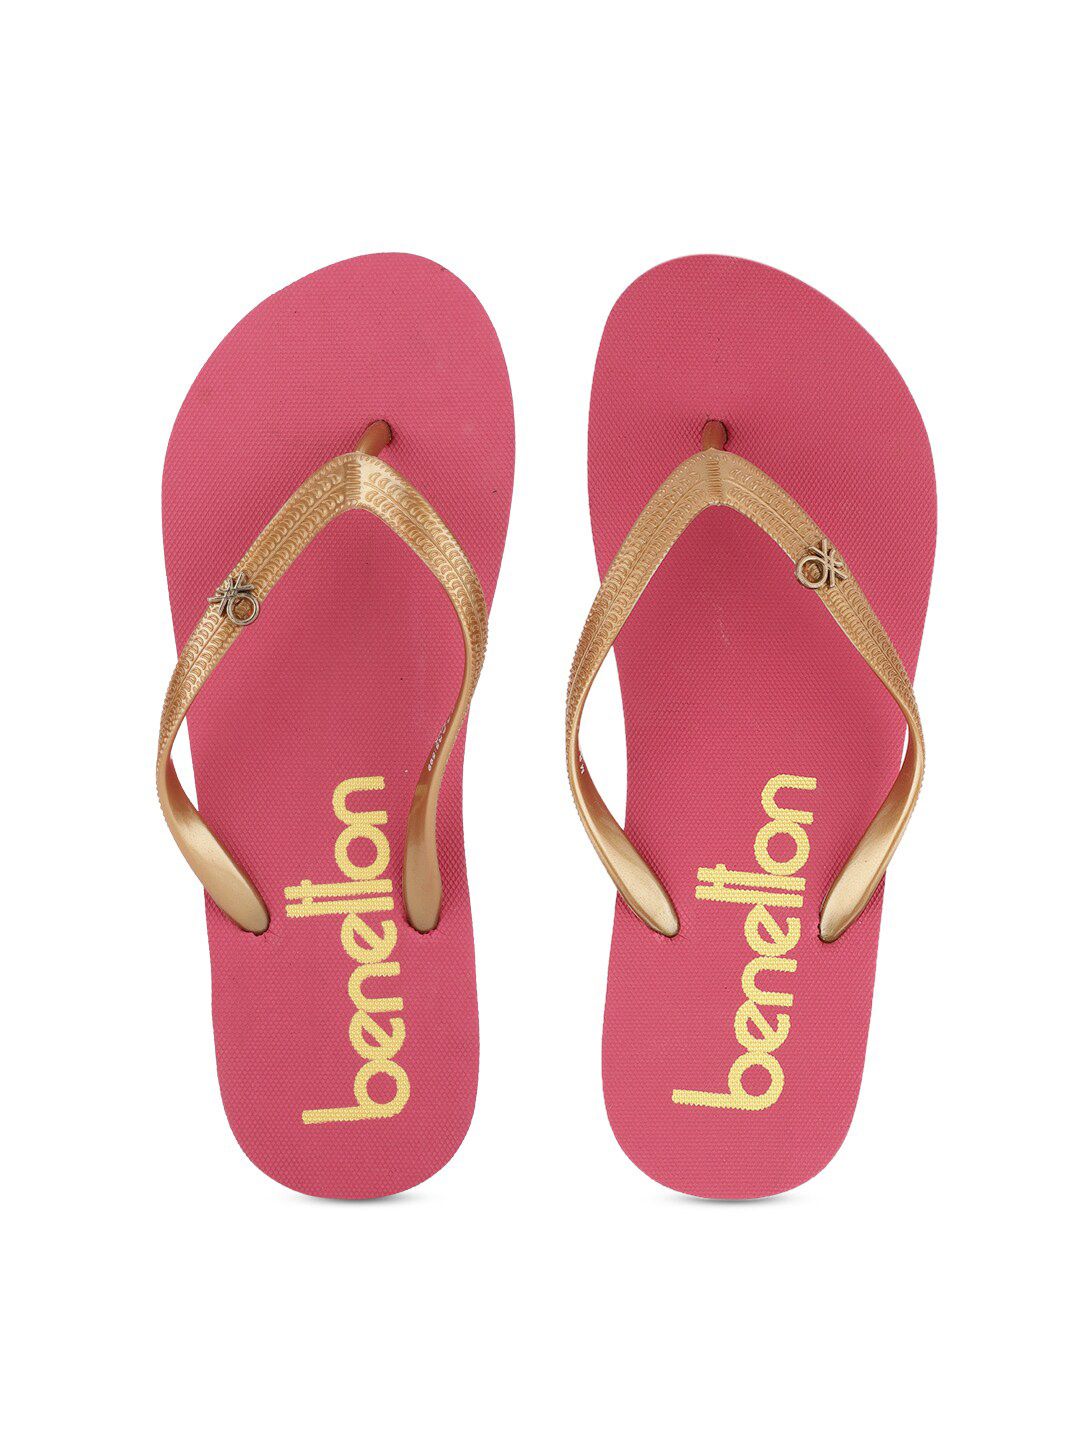 United Colors of Benetton Women Gold-Toned & Fuchsia Printed Rubber Thong Flip-Flops Price in India